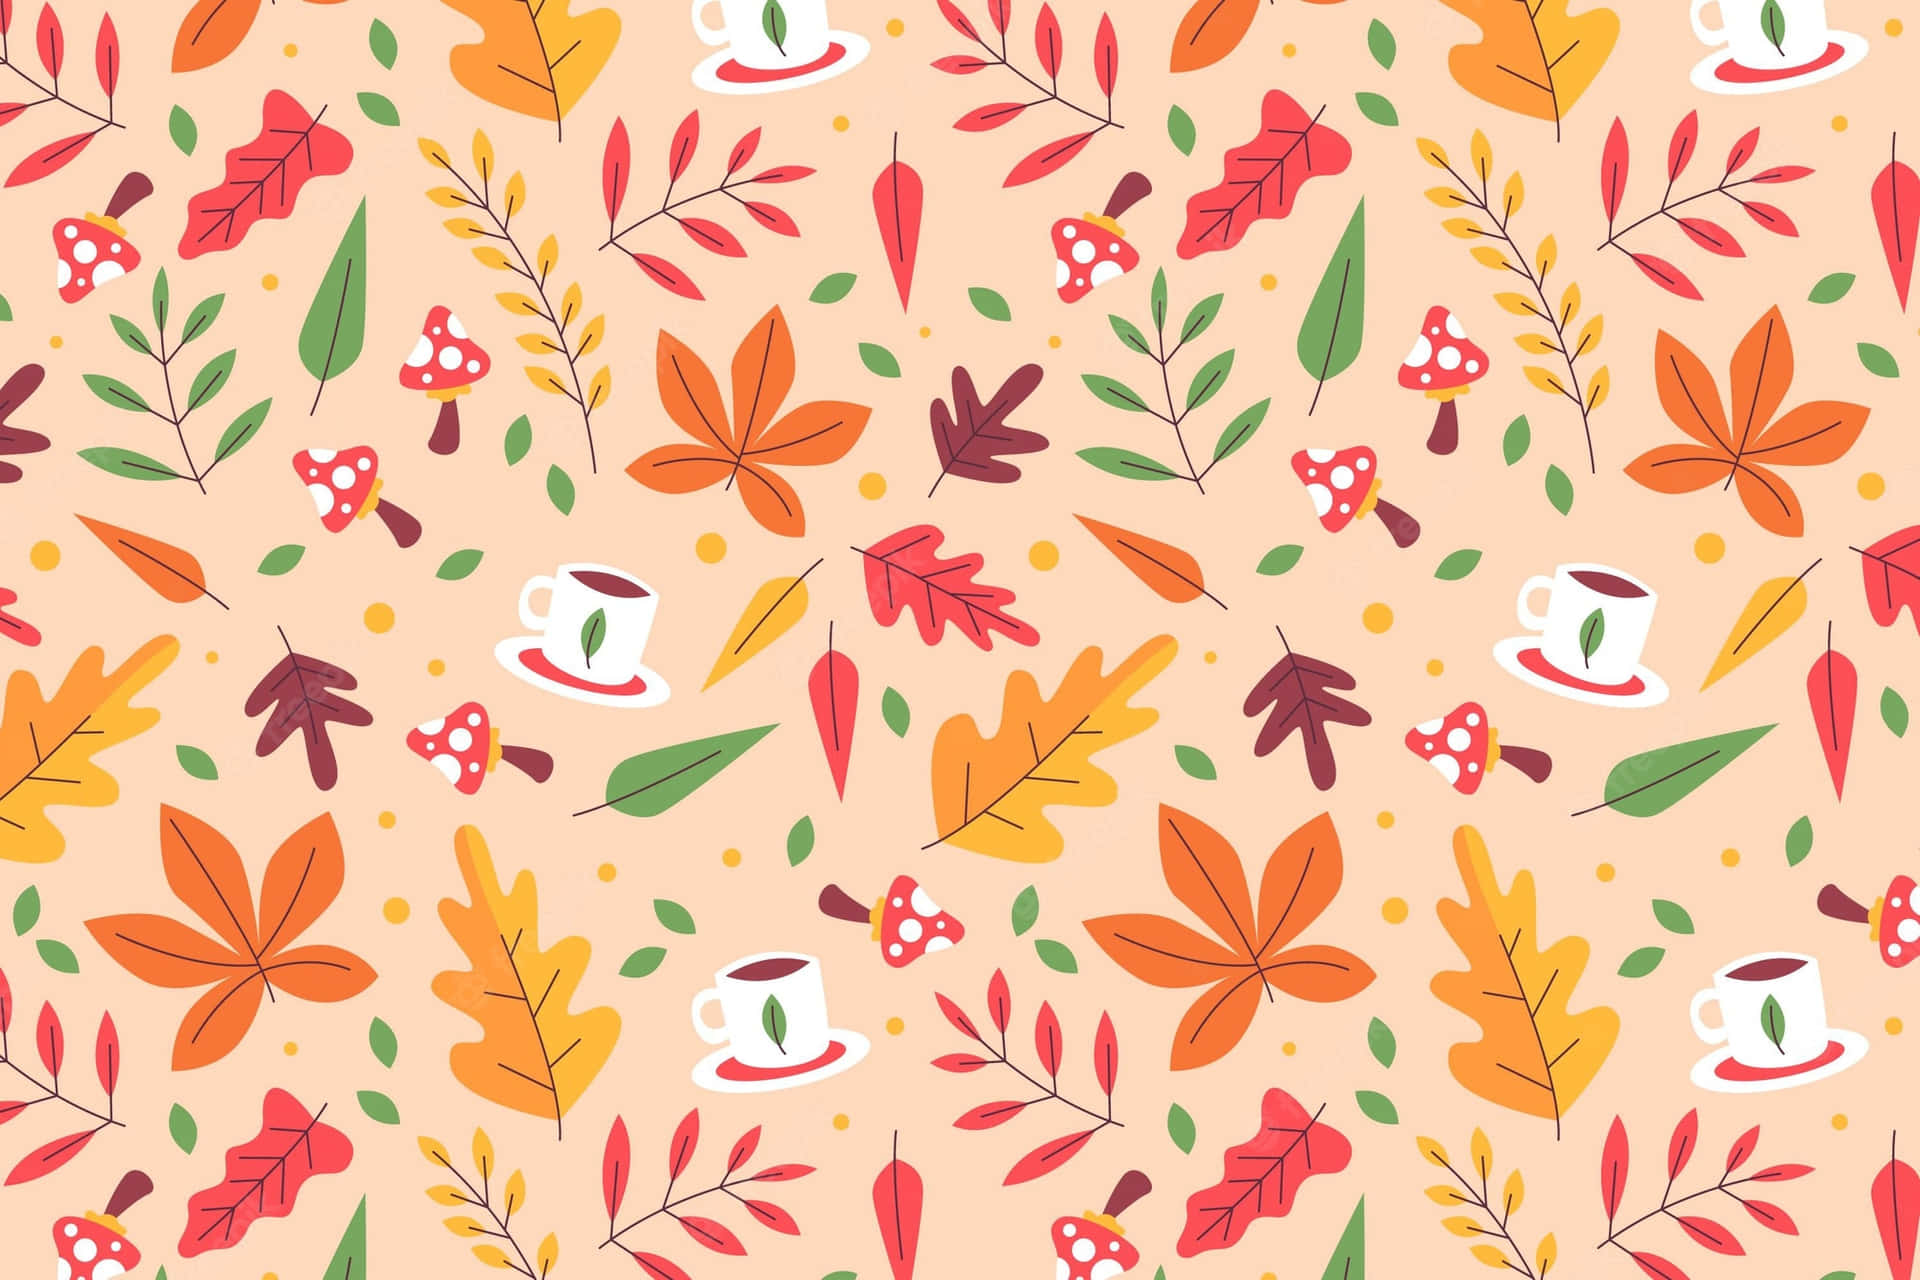 Keep your memories alive with this cute autumn-themed iPhone wallpaper! Wallpaper